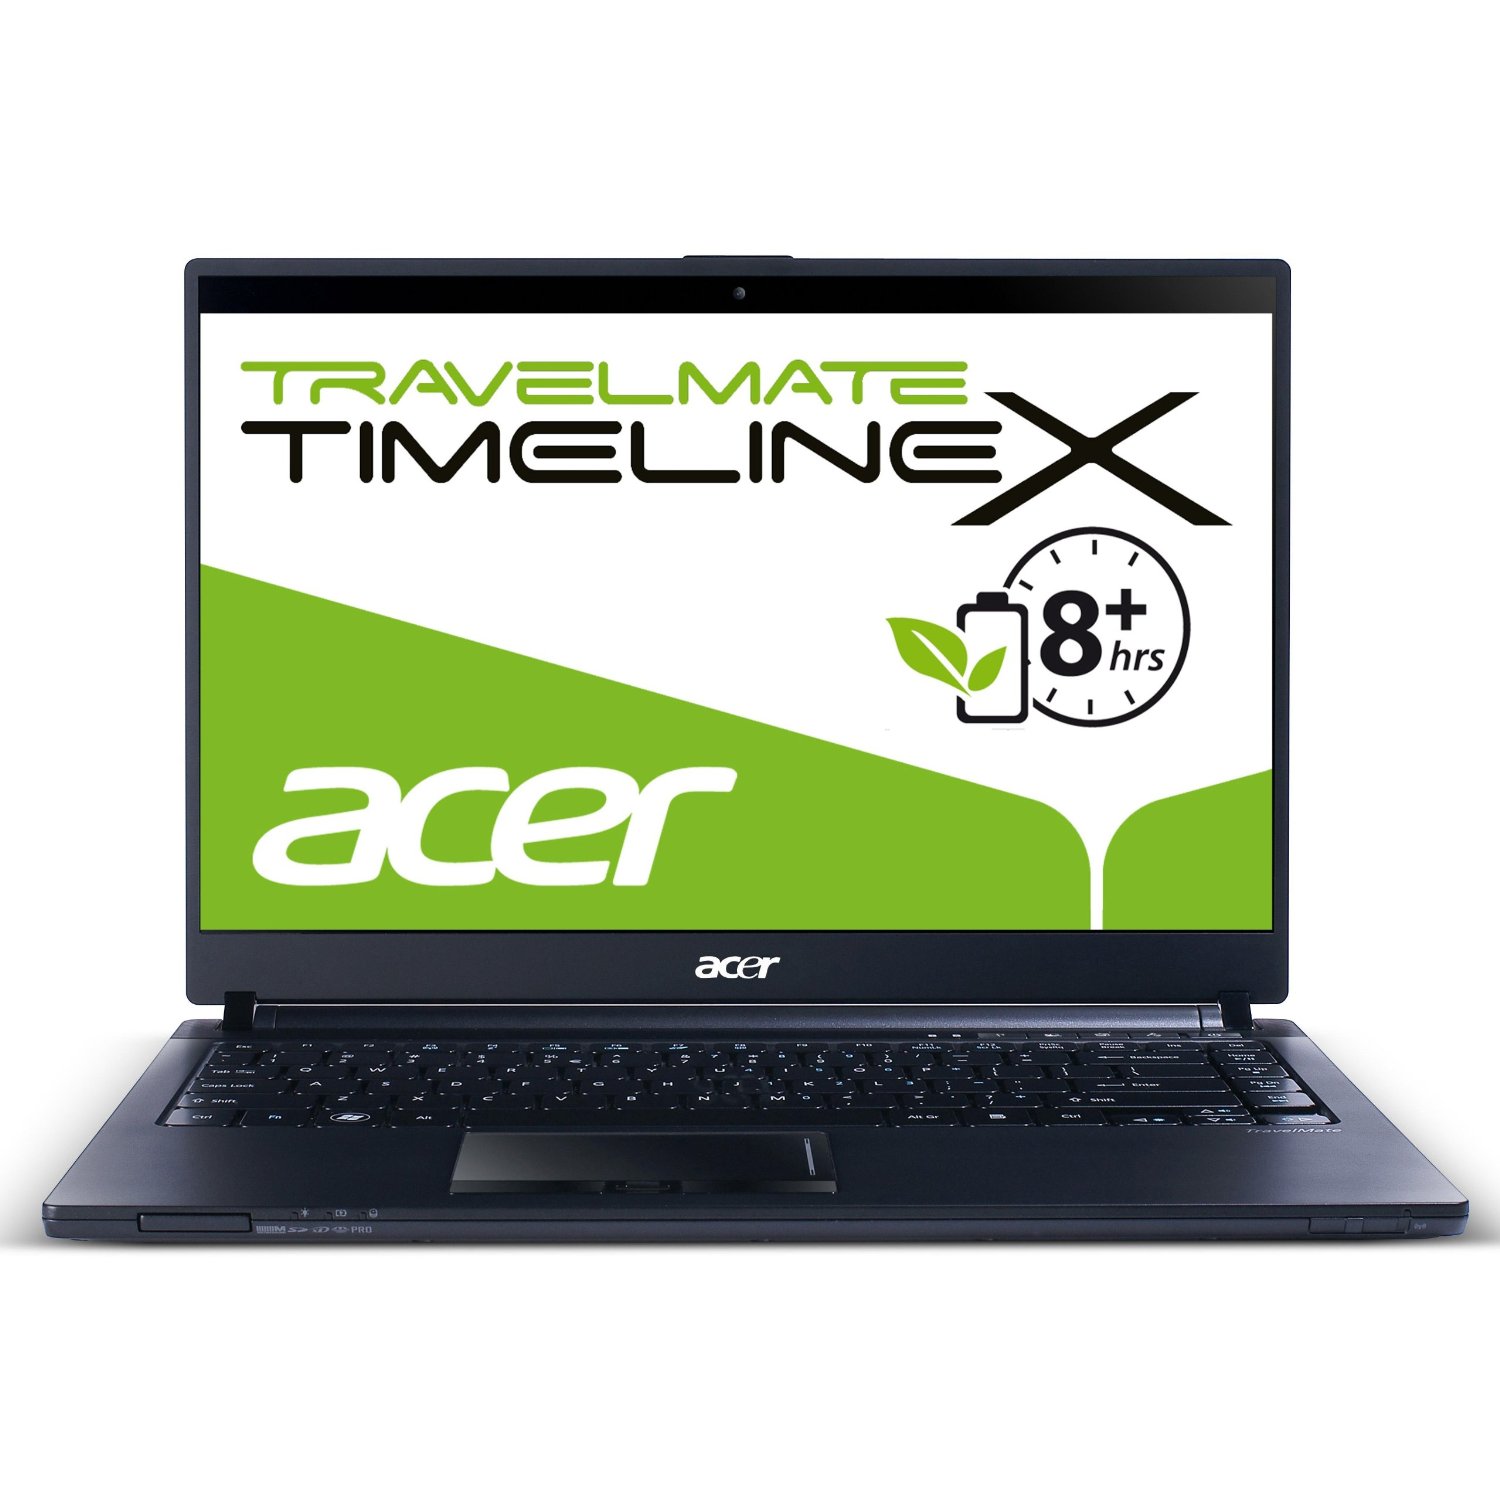 Acer Travelmate 4101Lmi Drivers Download